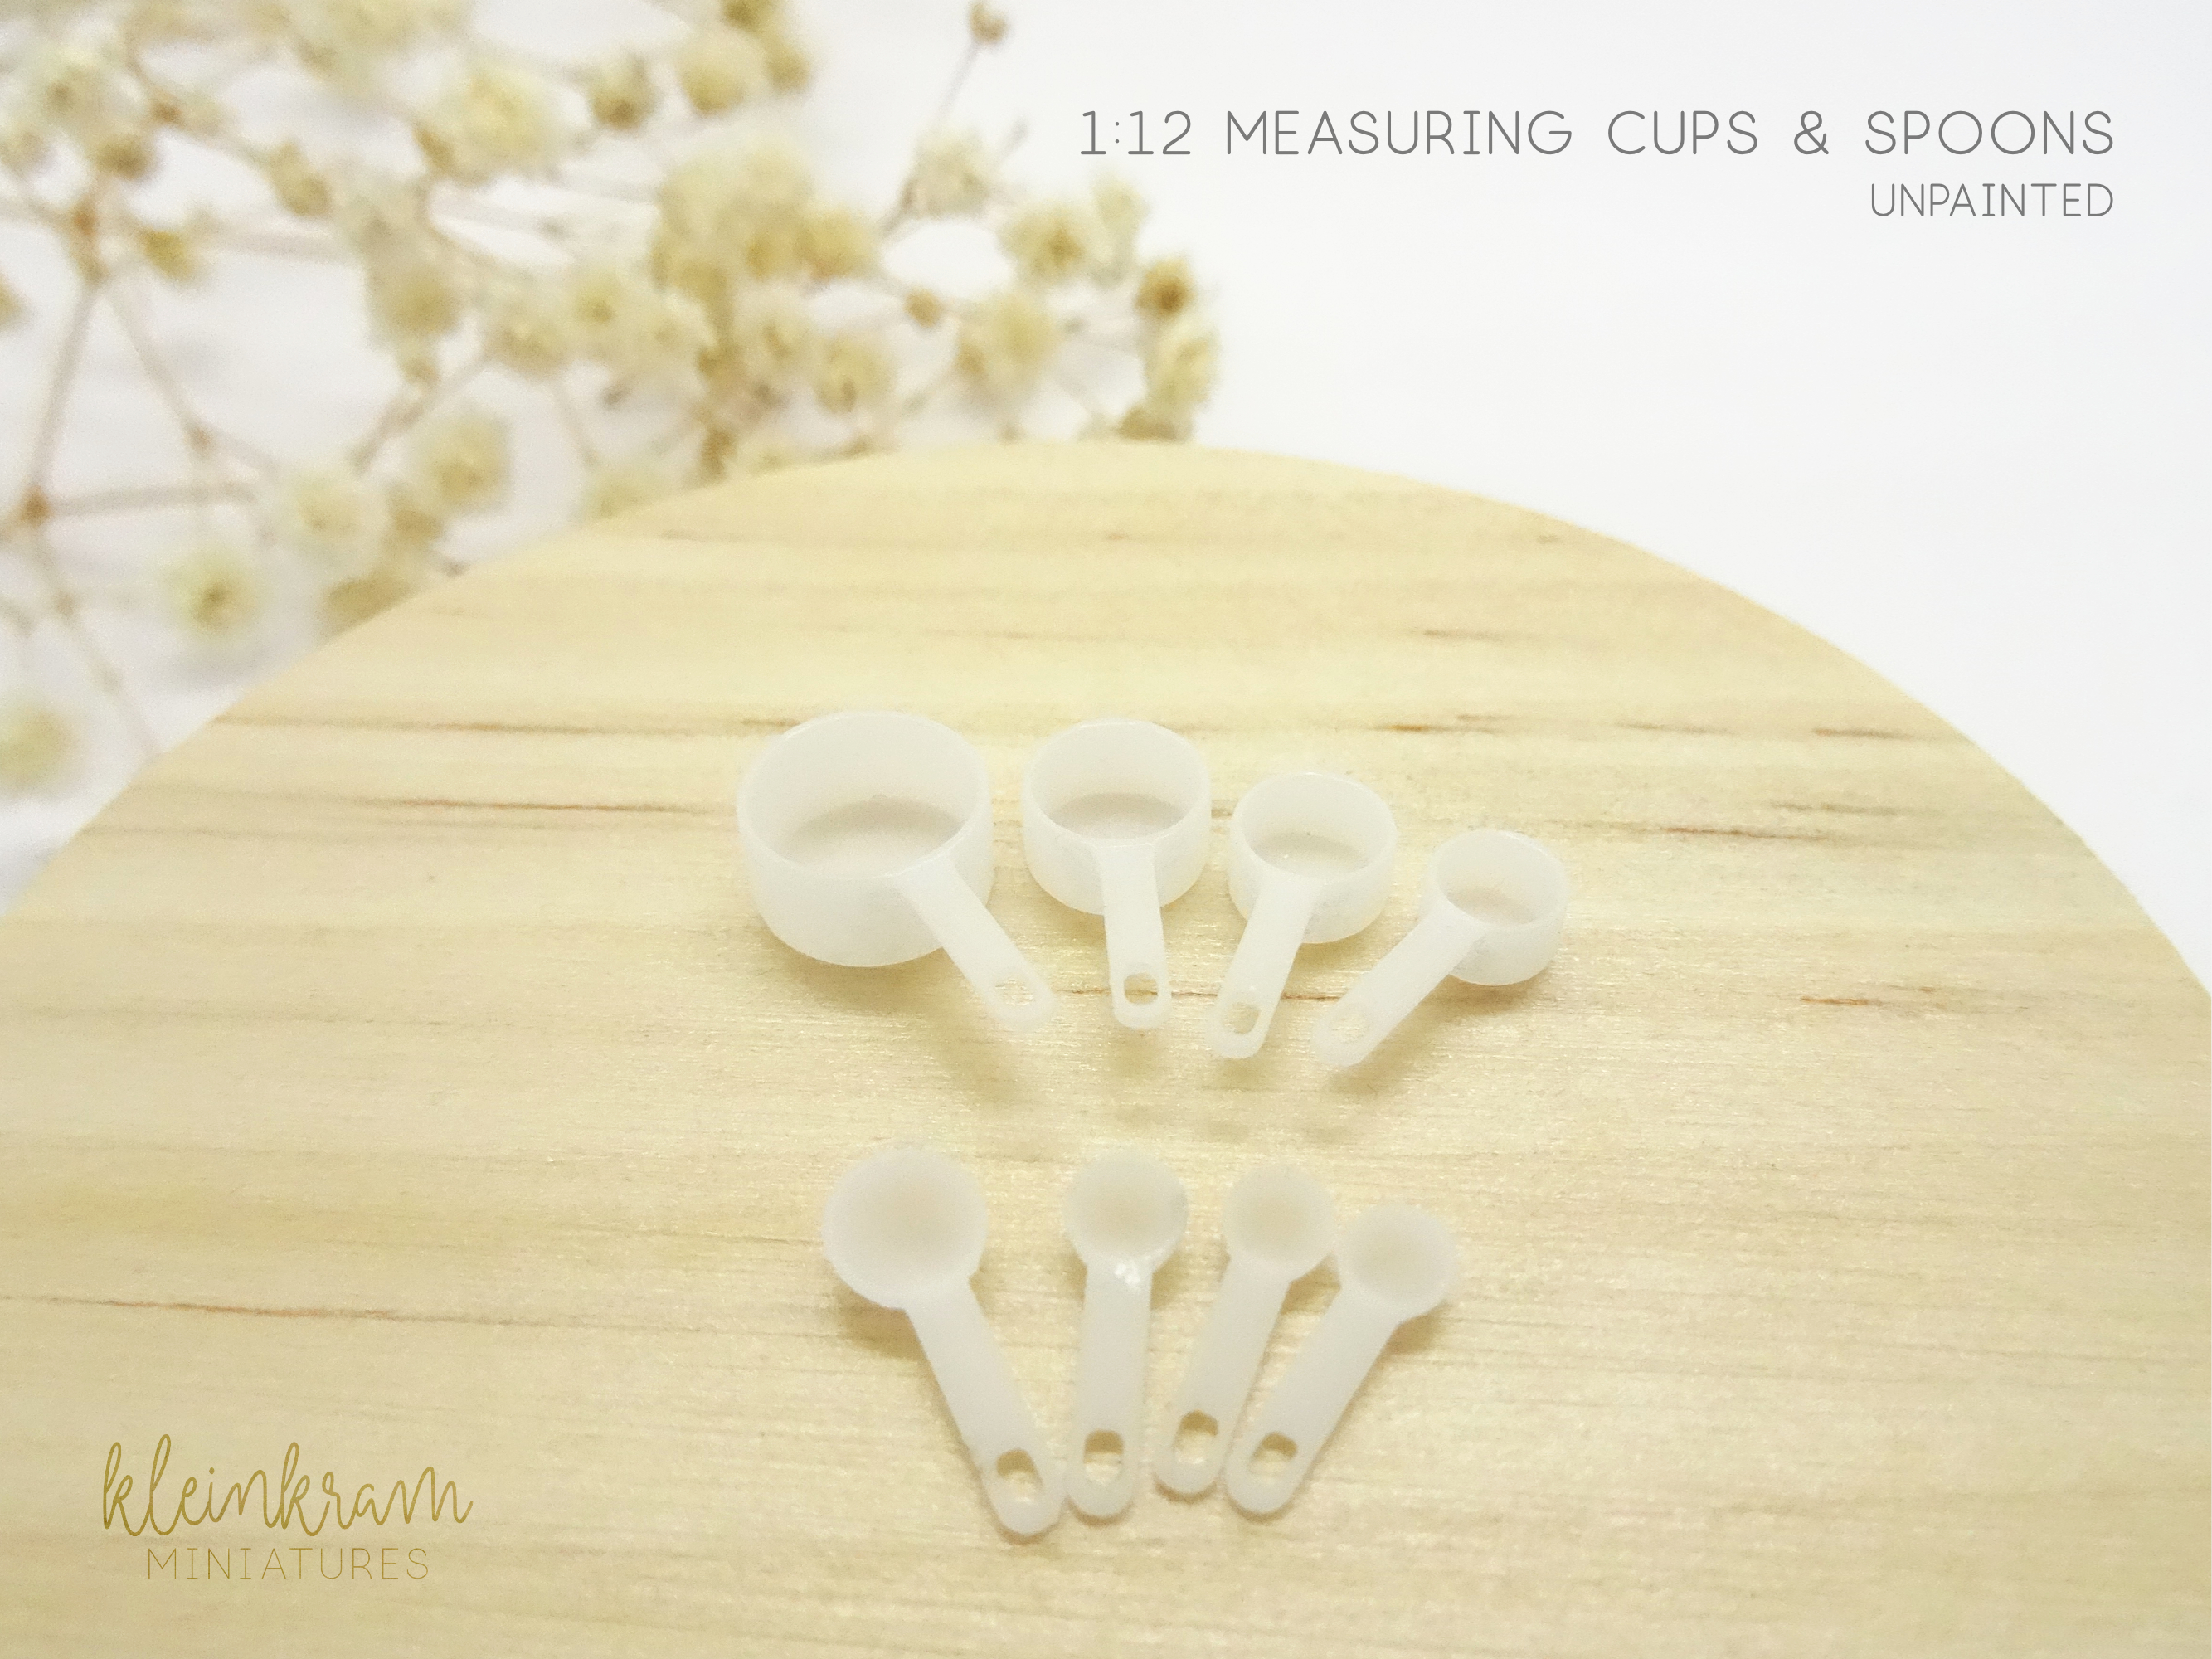 Measuring Cups & Spoons - 1:12 Miniature